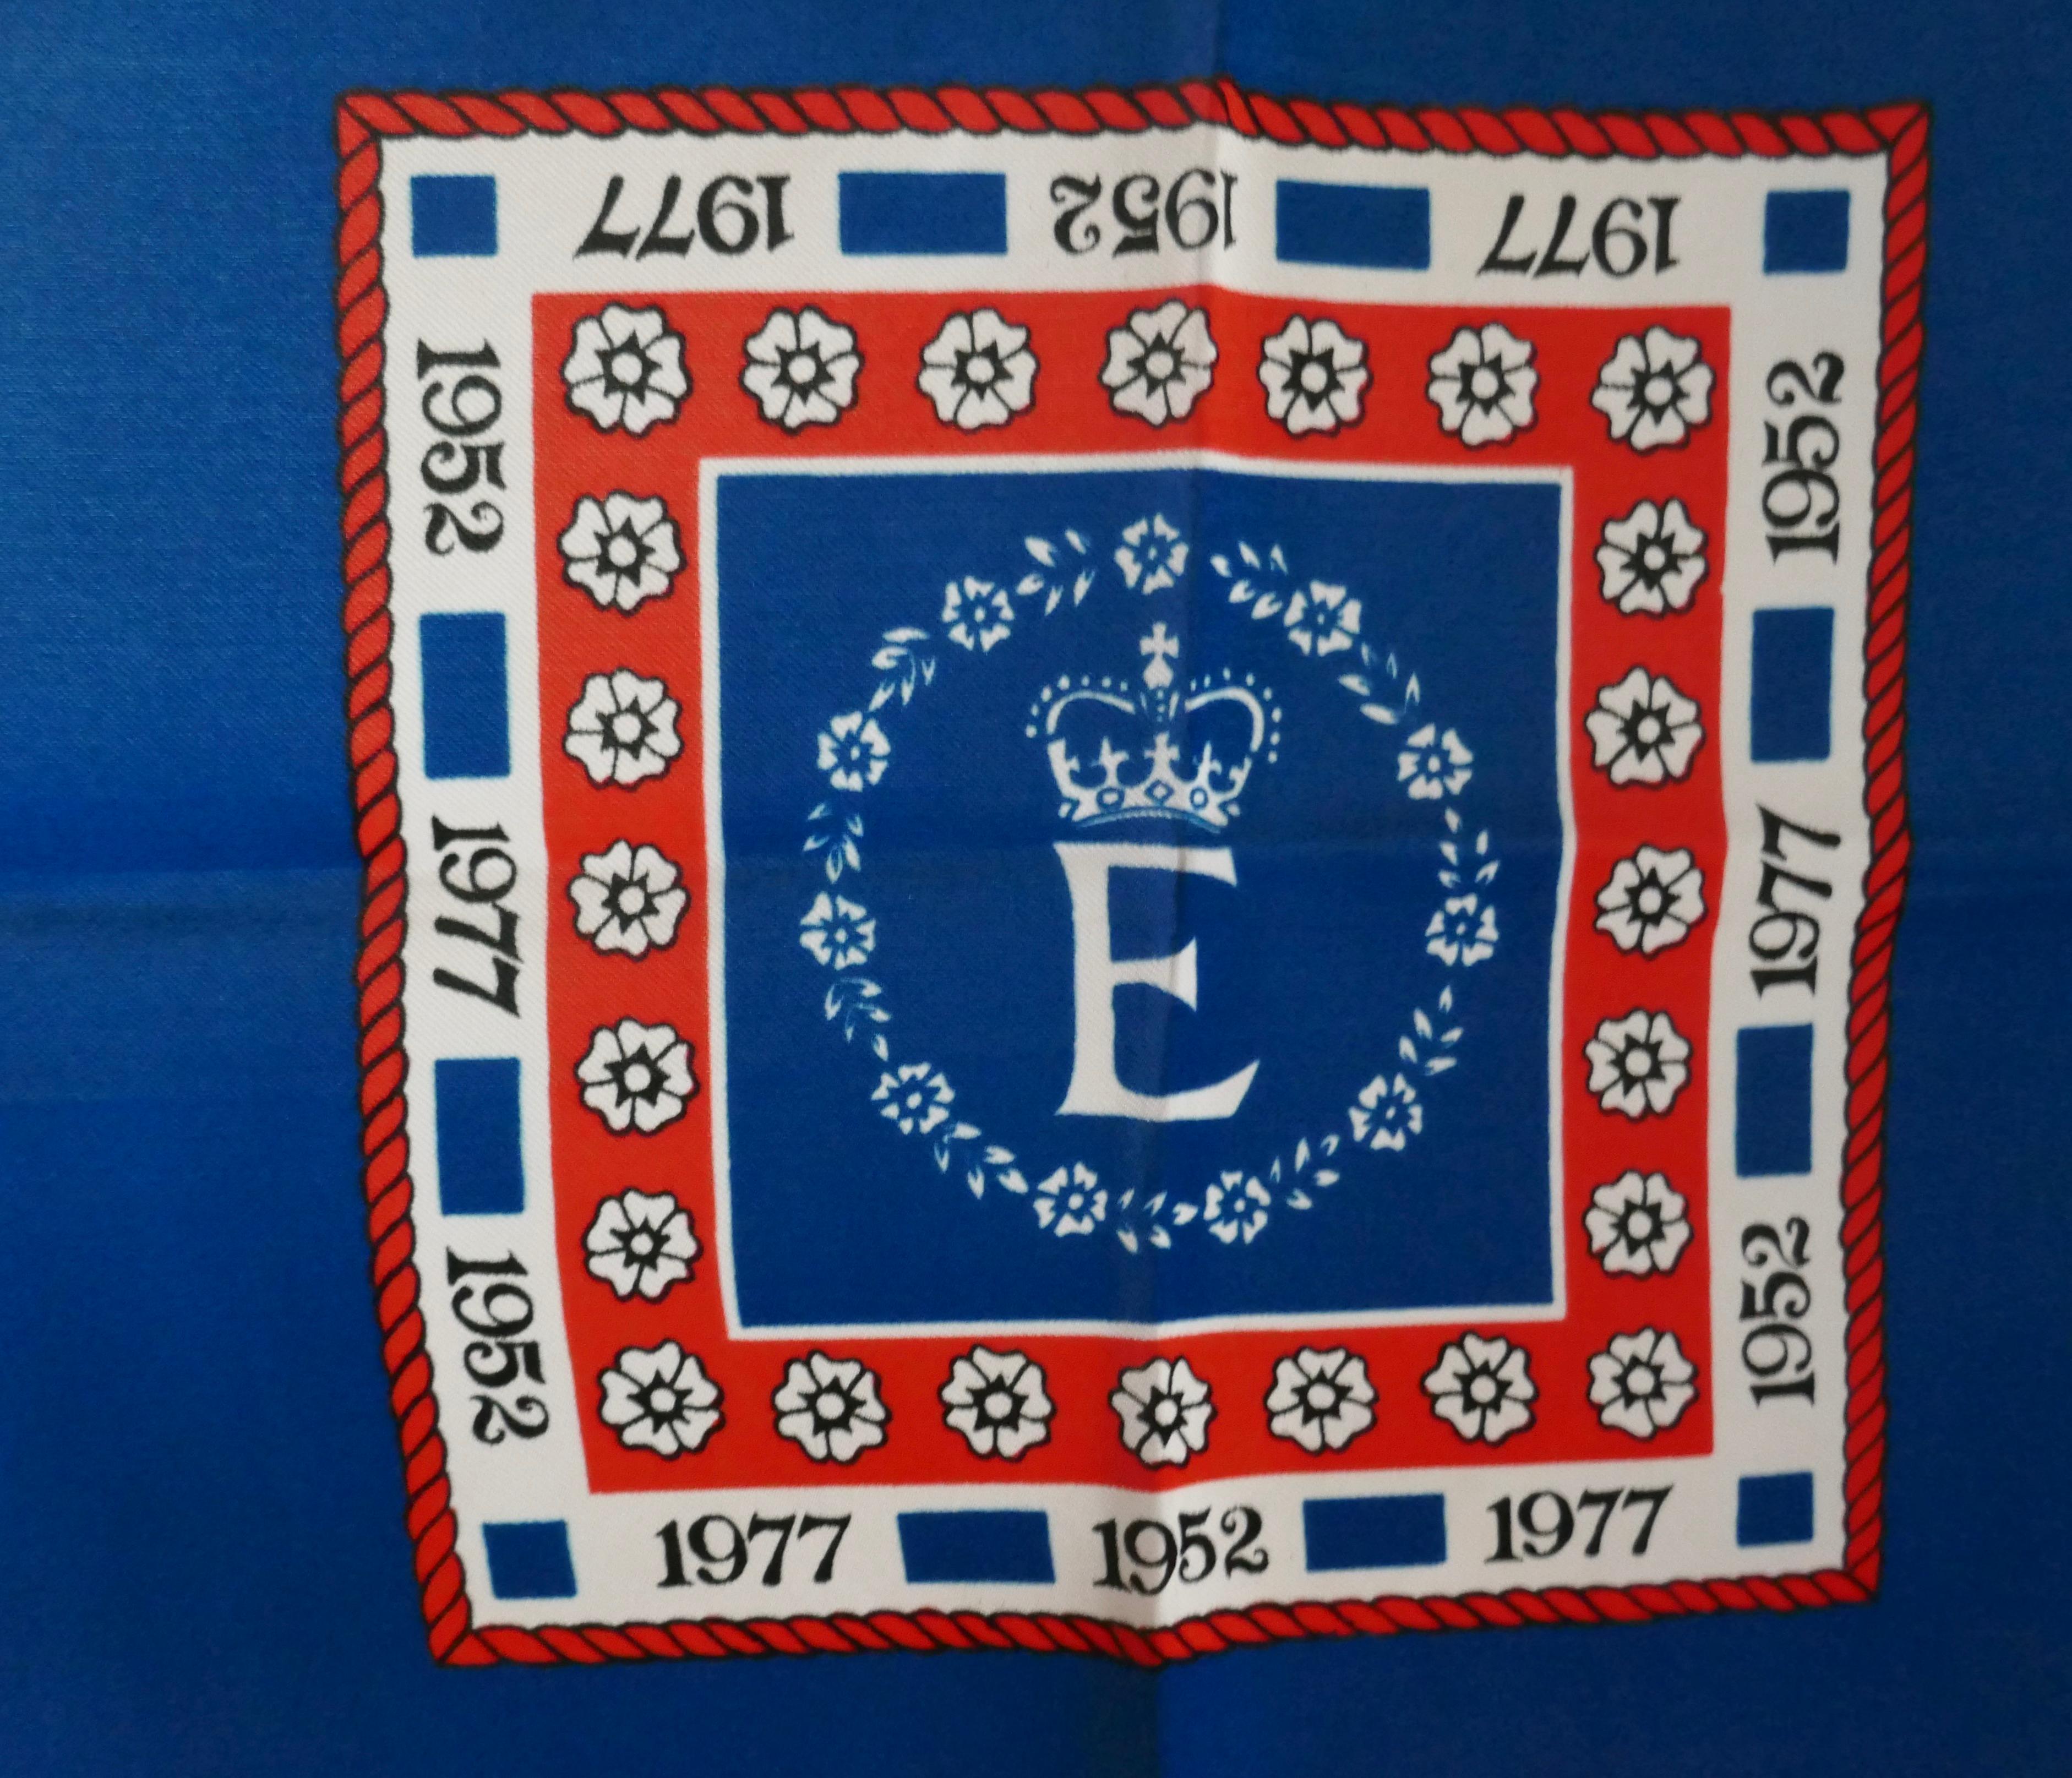 Queen Elizabeth the II Silver Jubilee Commemorative  Scarf  


Lovely scarf in good condition, un worn
Theme: Commemorative 
Colour: Red White and Blue
Designer: 

 
Material: polyester
 
Size: 26”x 26” (measurements are approximate)
This is a